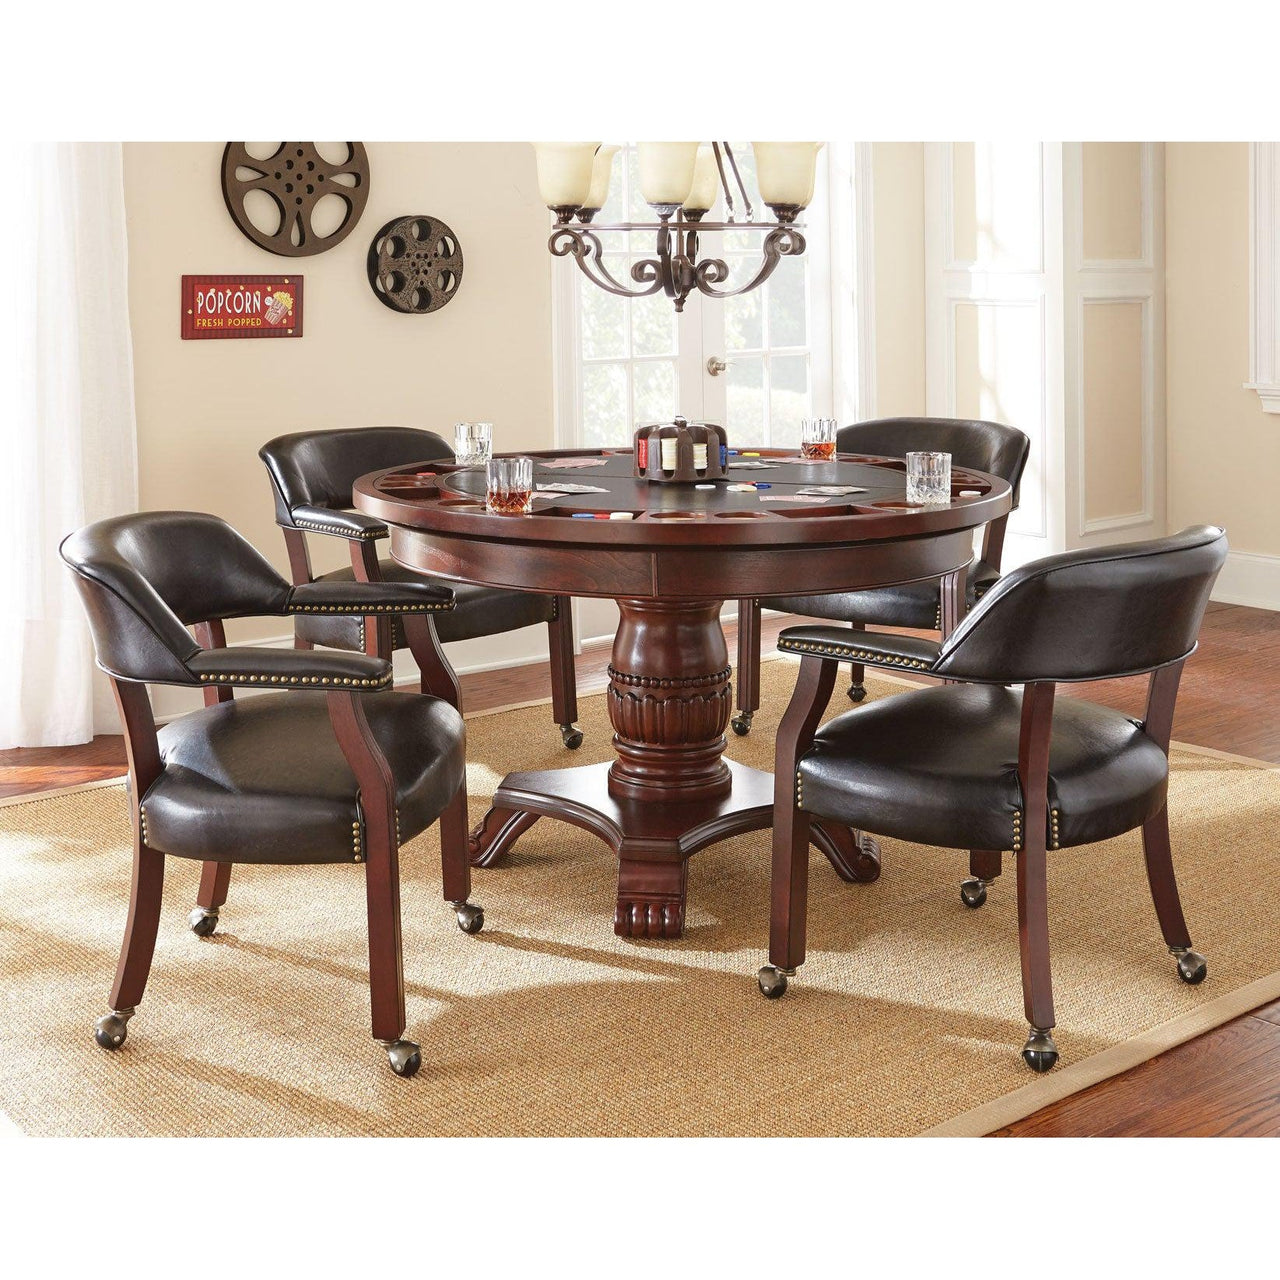 Convertible Poker Table Set Tournament in Black with matching Chairs-AMERICANA-POKER-TABLES